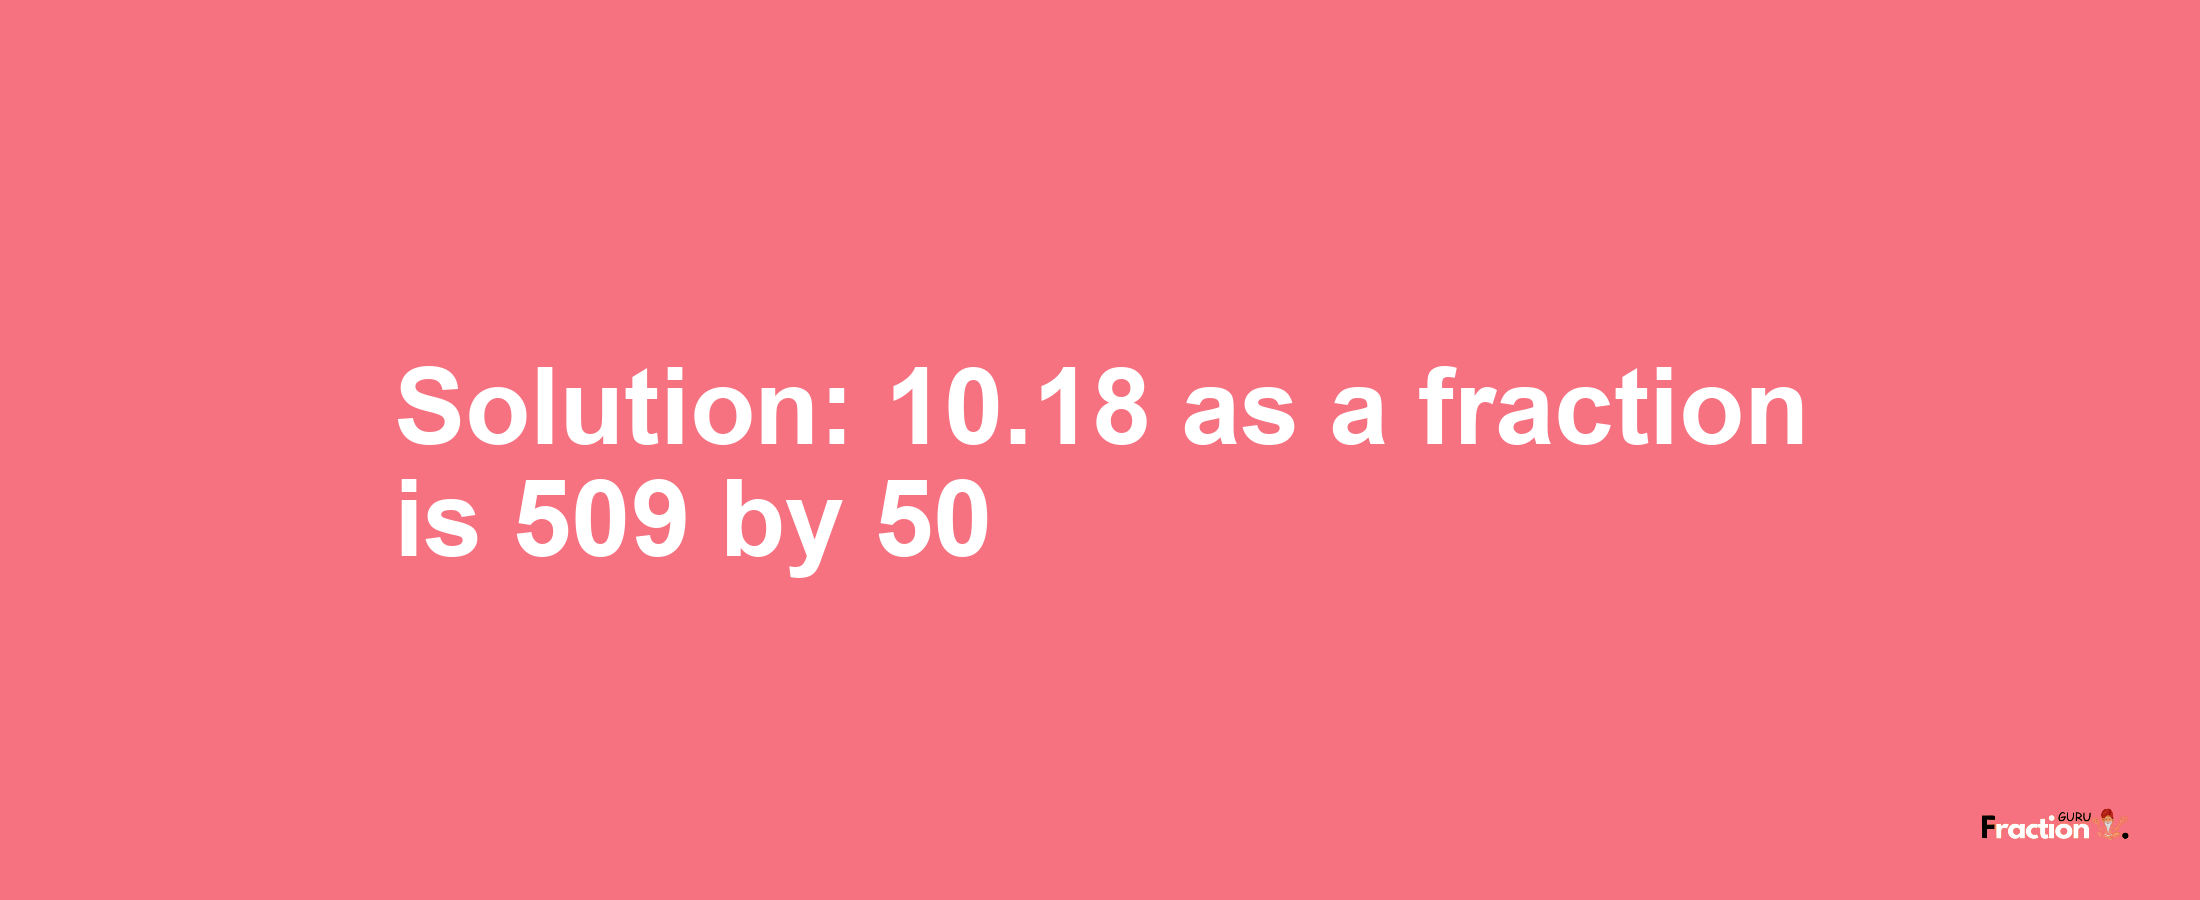 Solution:10.18 as a fraction is 509/50